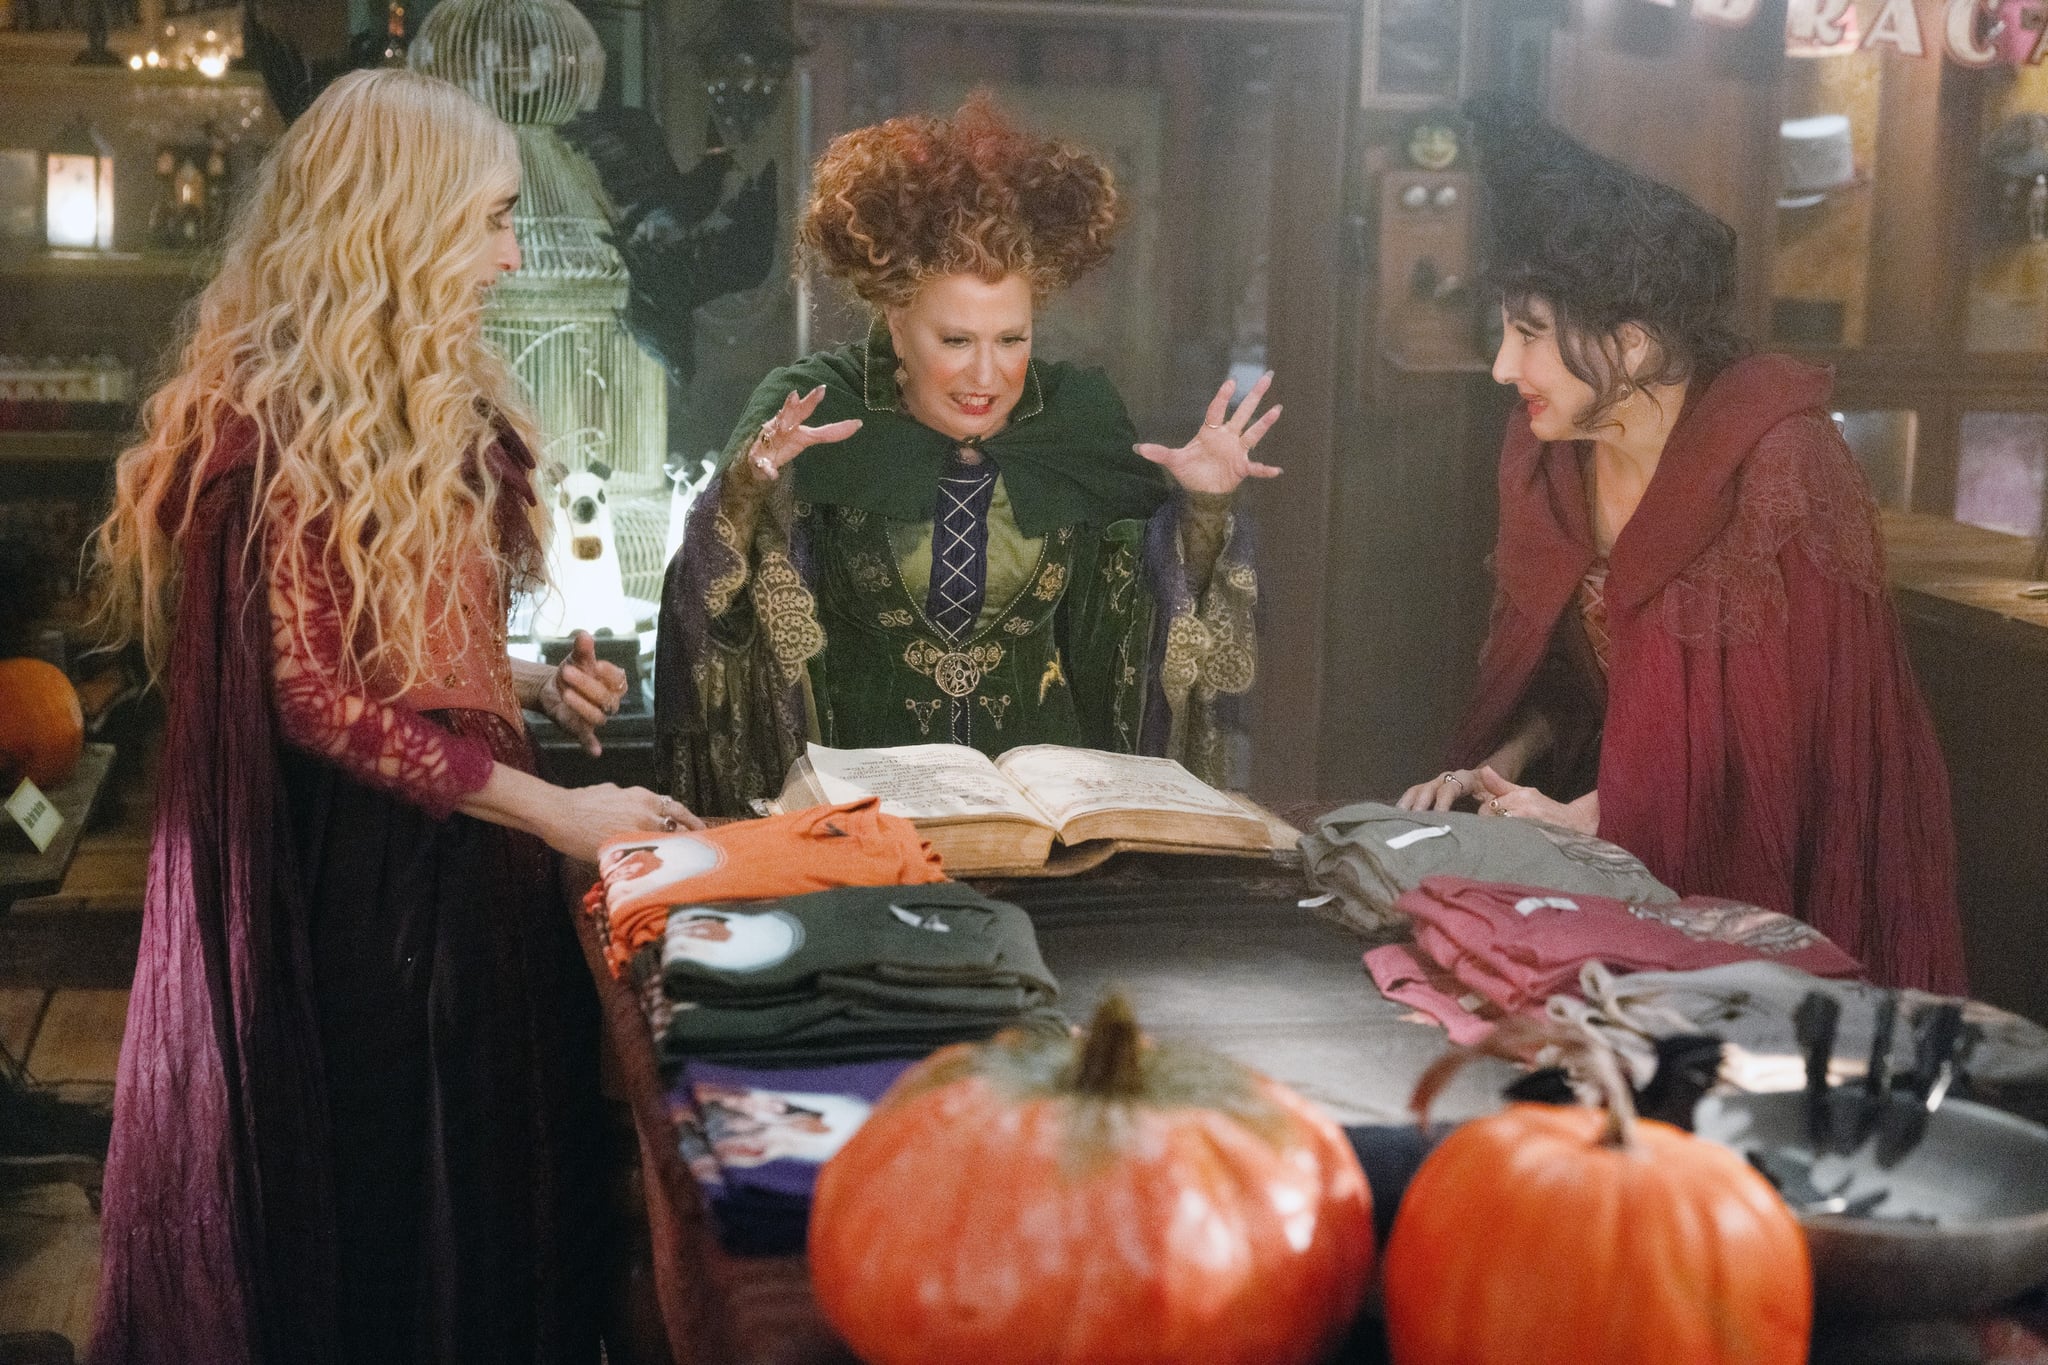 Real Witches React to “Hocus Pocus 2”: “Magic Is Not a Bad Thing or a Good Thing”